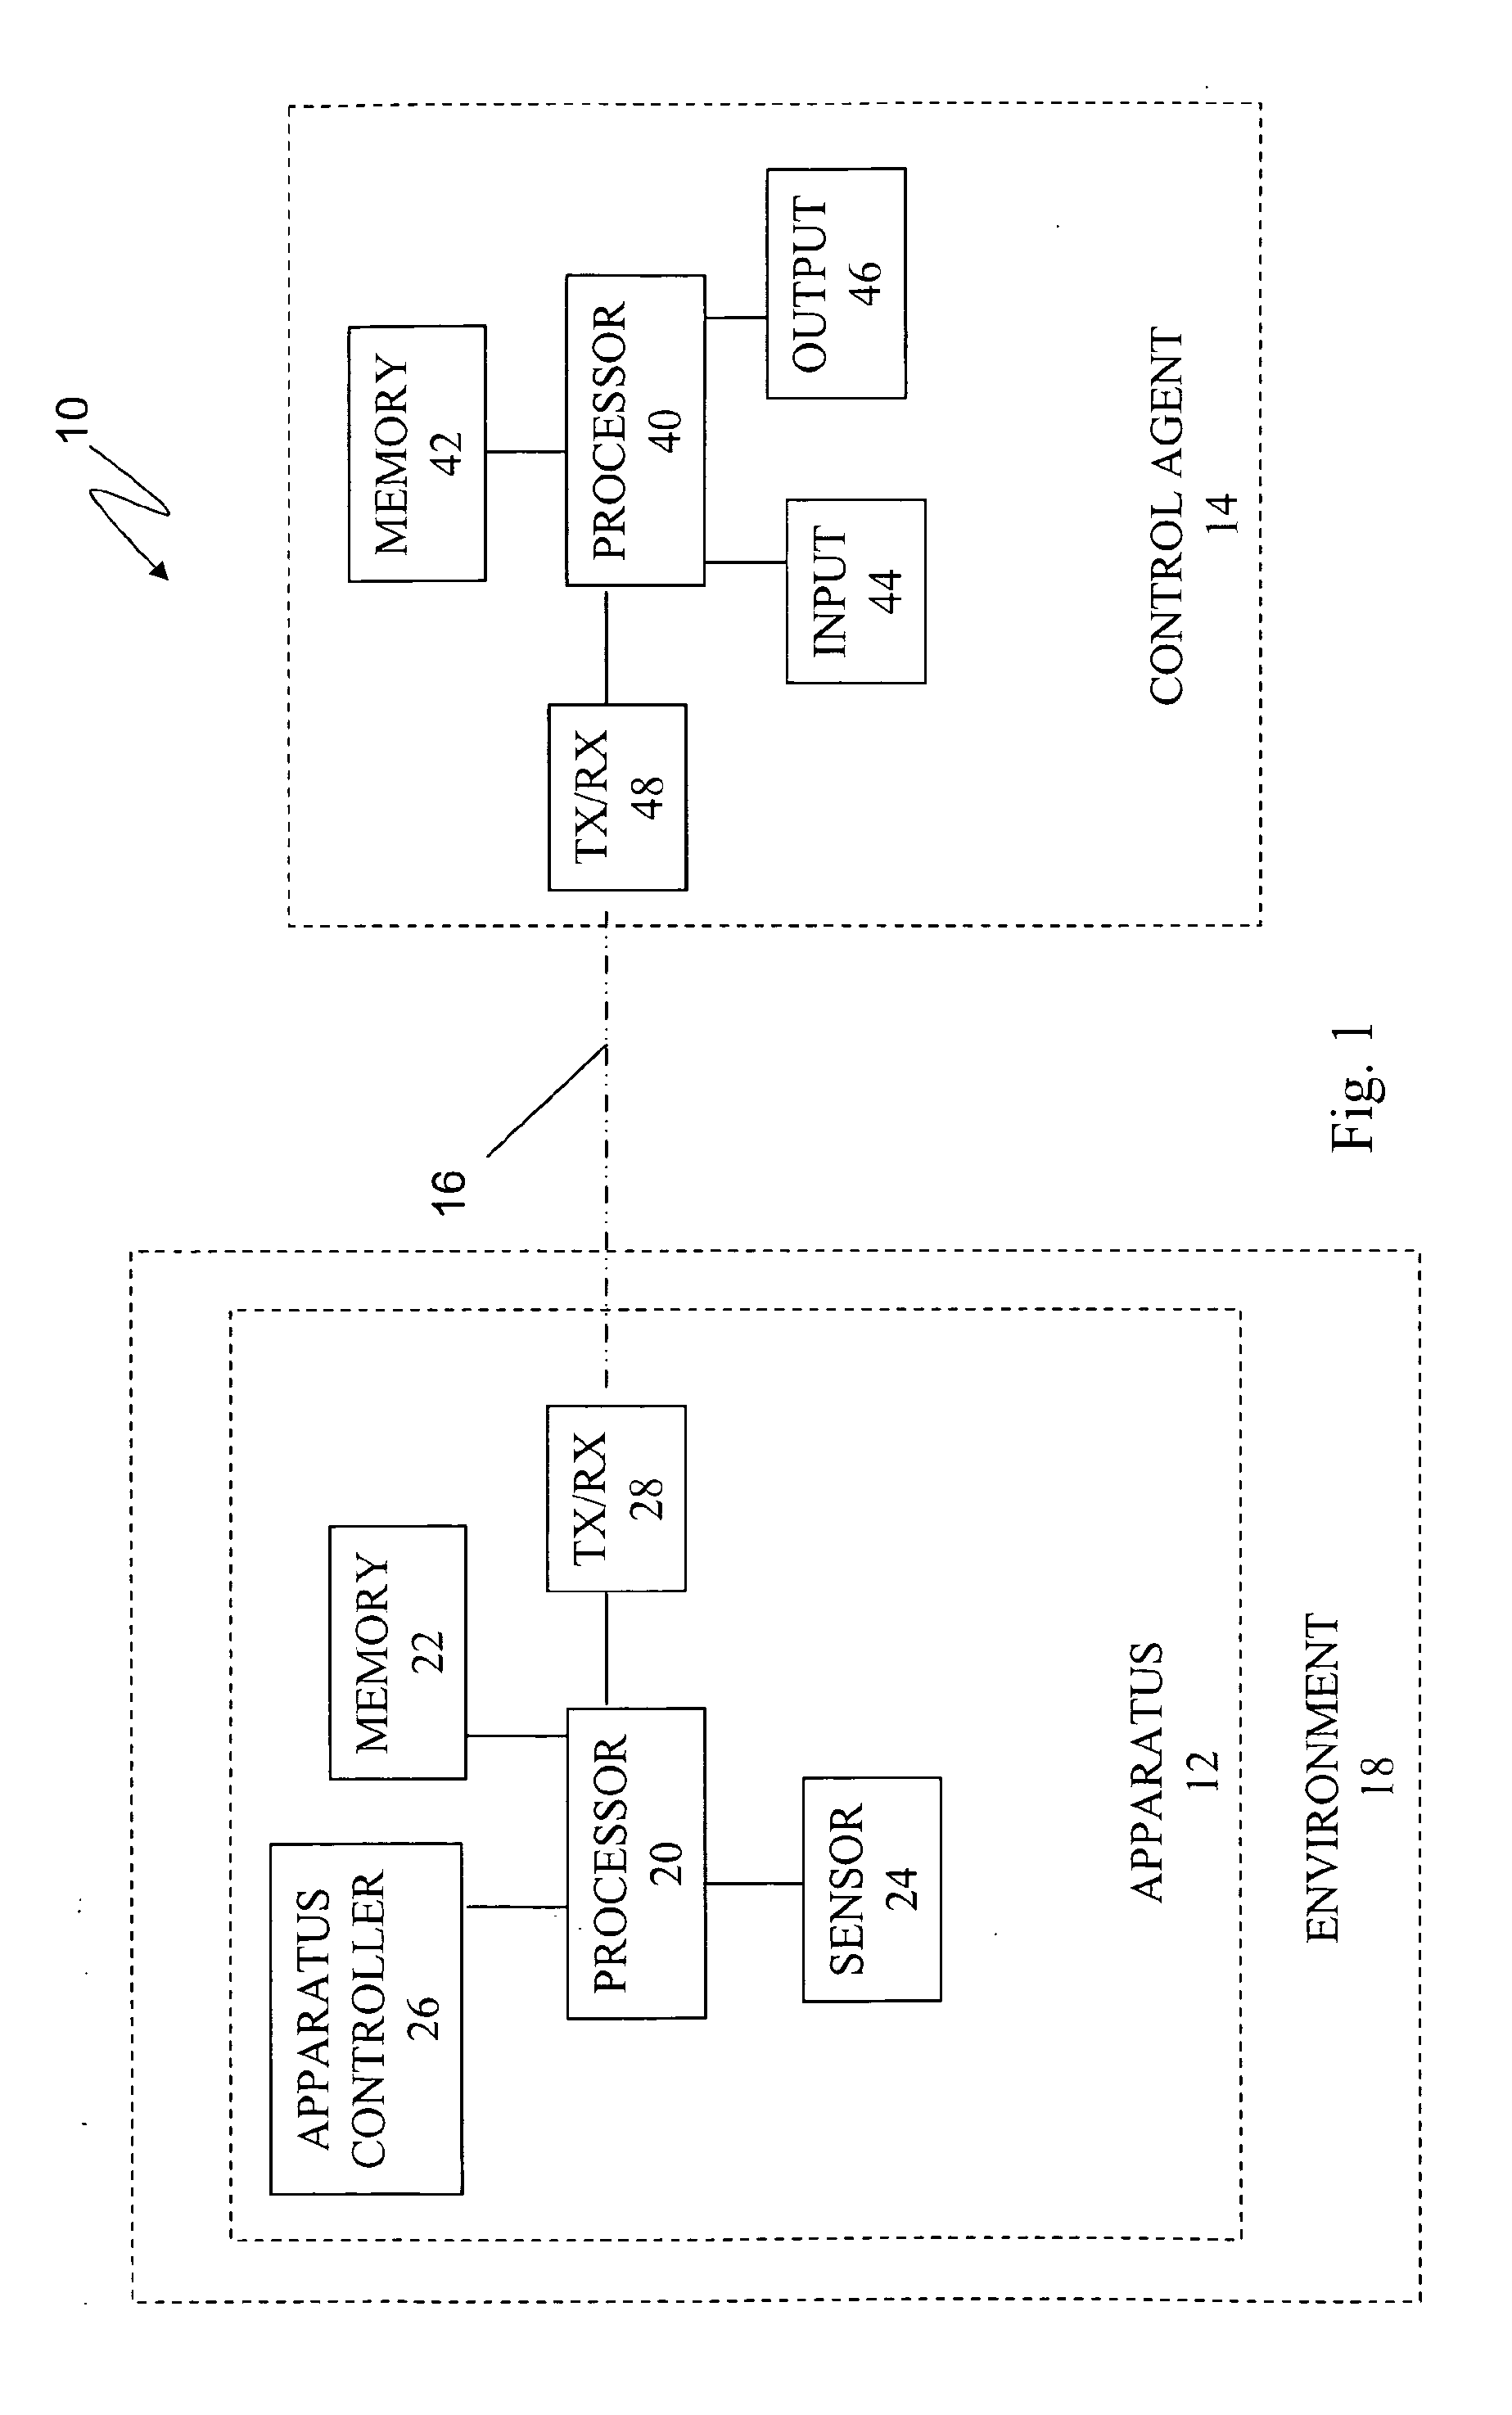 Apparatuses, Systems, and Methods for Apparatus Operation and Remote Sensing